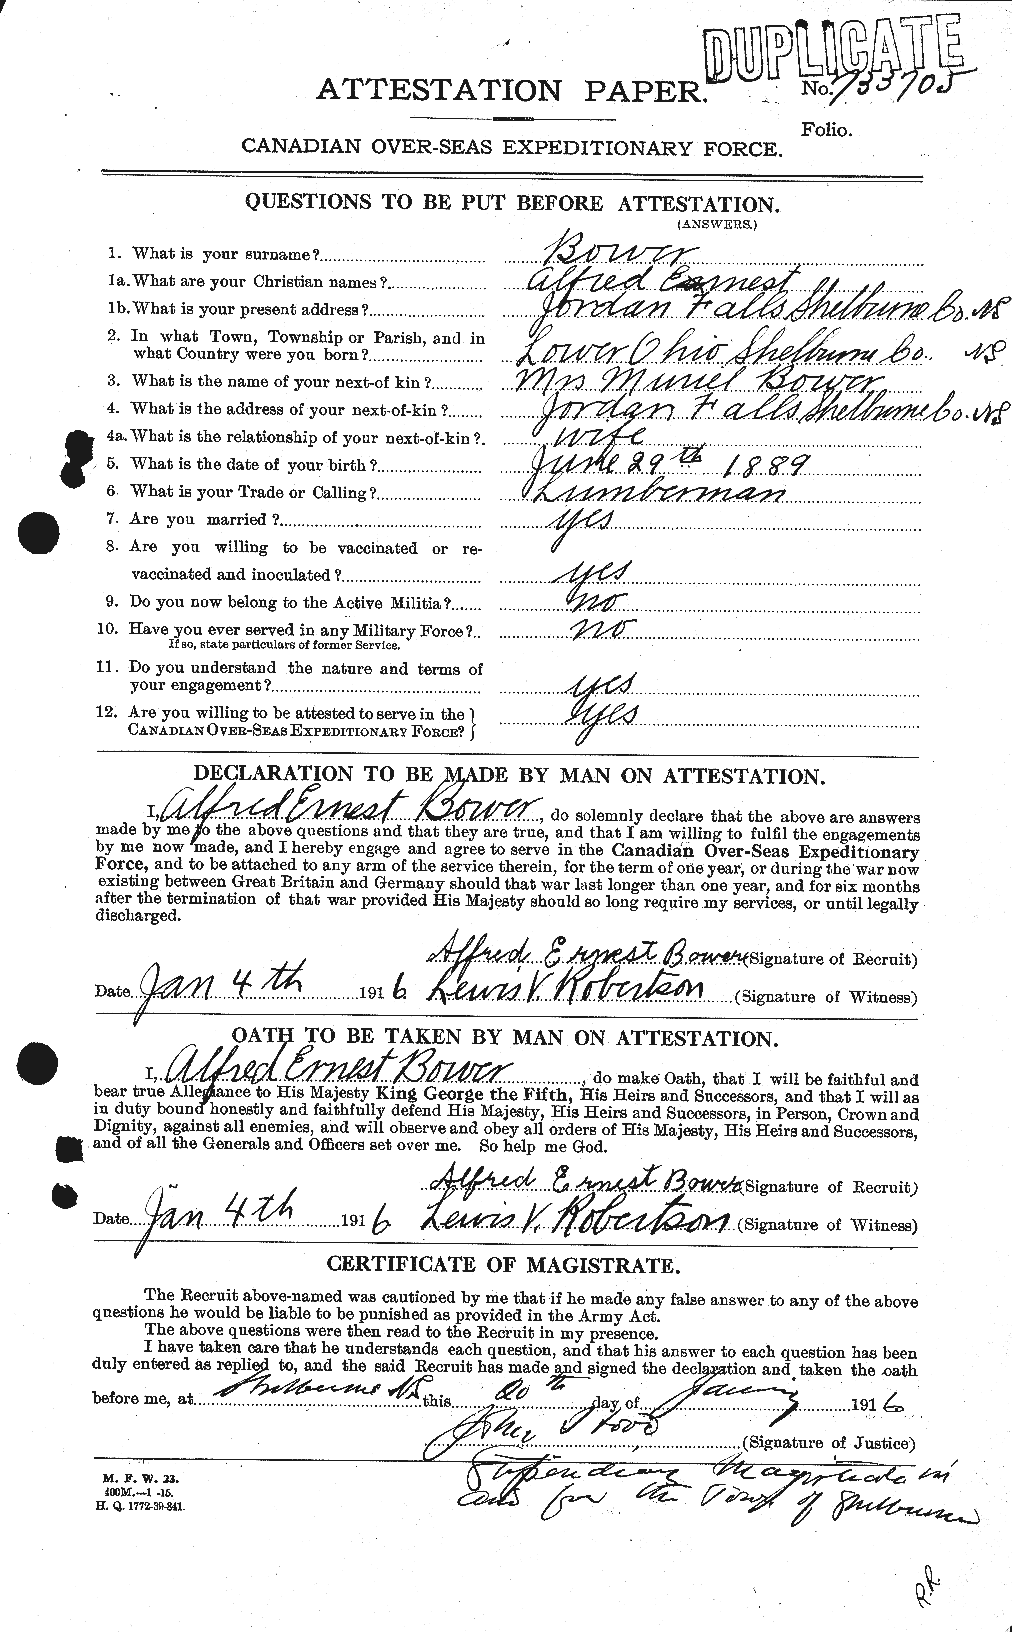 Personnel Records of the First World War - CEF 255493a